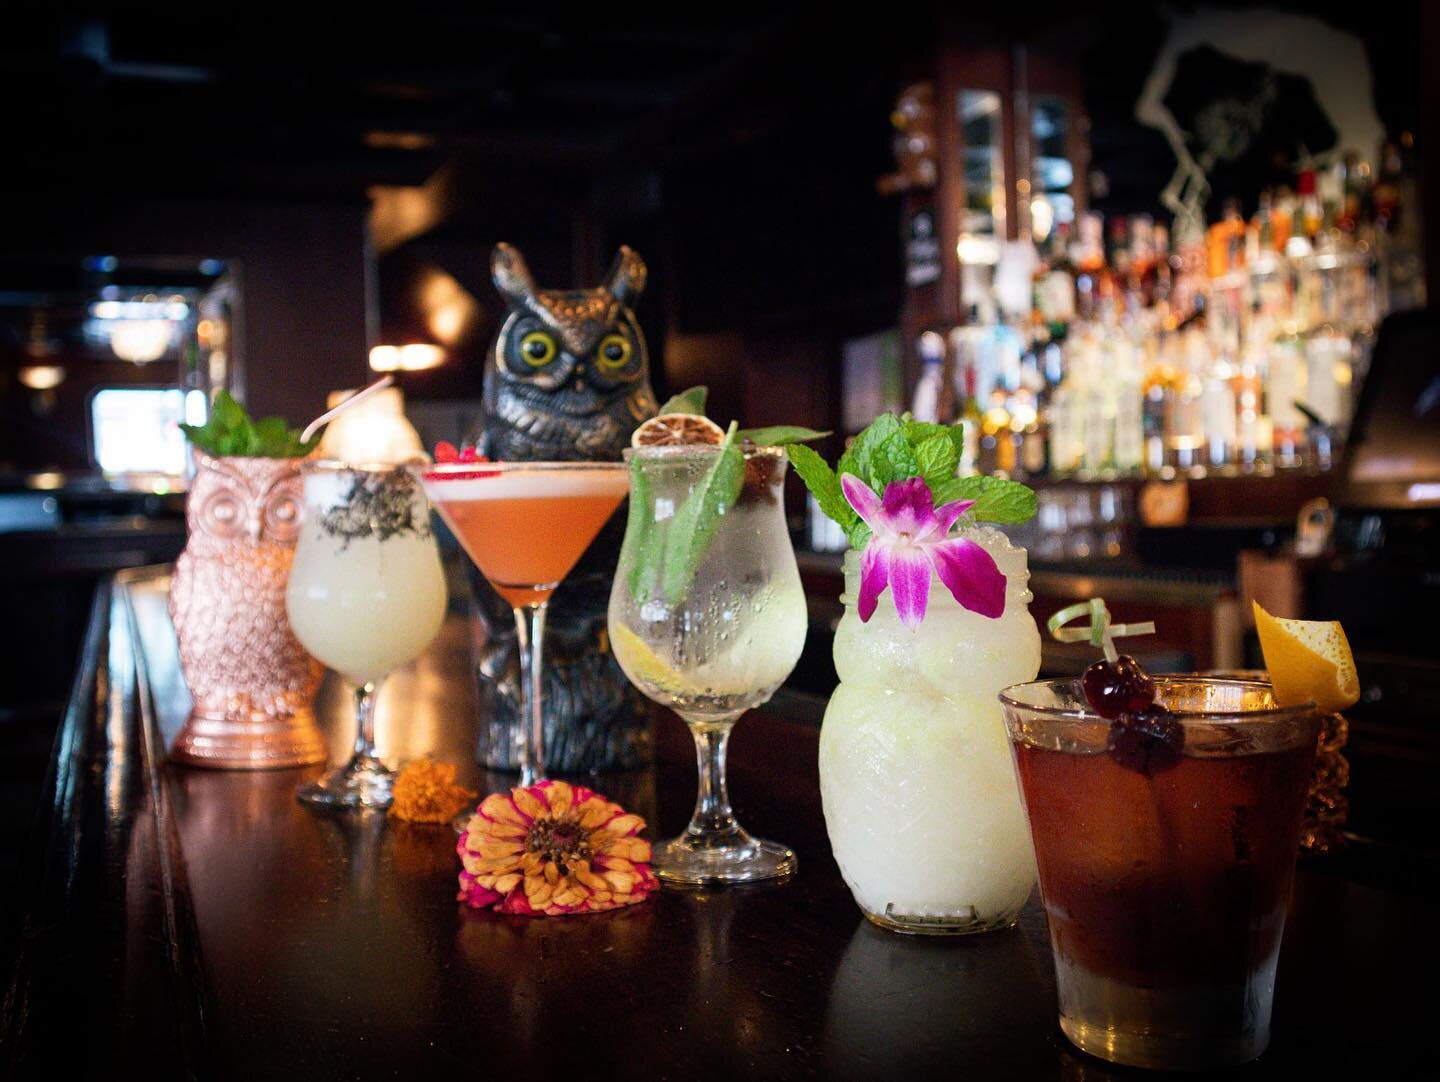 Night Owls, unite! 🦉🌙 
Come stir up some magic and mystery at our owl-themed bar! #OwlNightLong Open today until 2am!
&bull;
&bull;
&bull;
#owltree #owl #owltheme #owlbar #cocktails #drinks #wine #beer #lounge #cocktaillounge #unionsquare #sanfranc